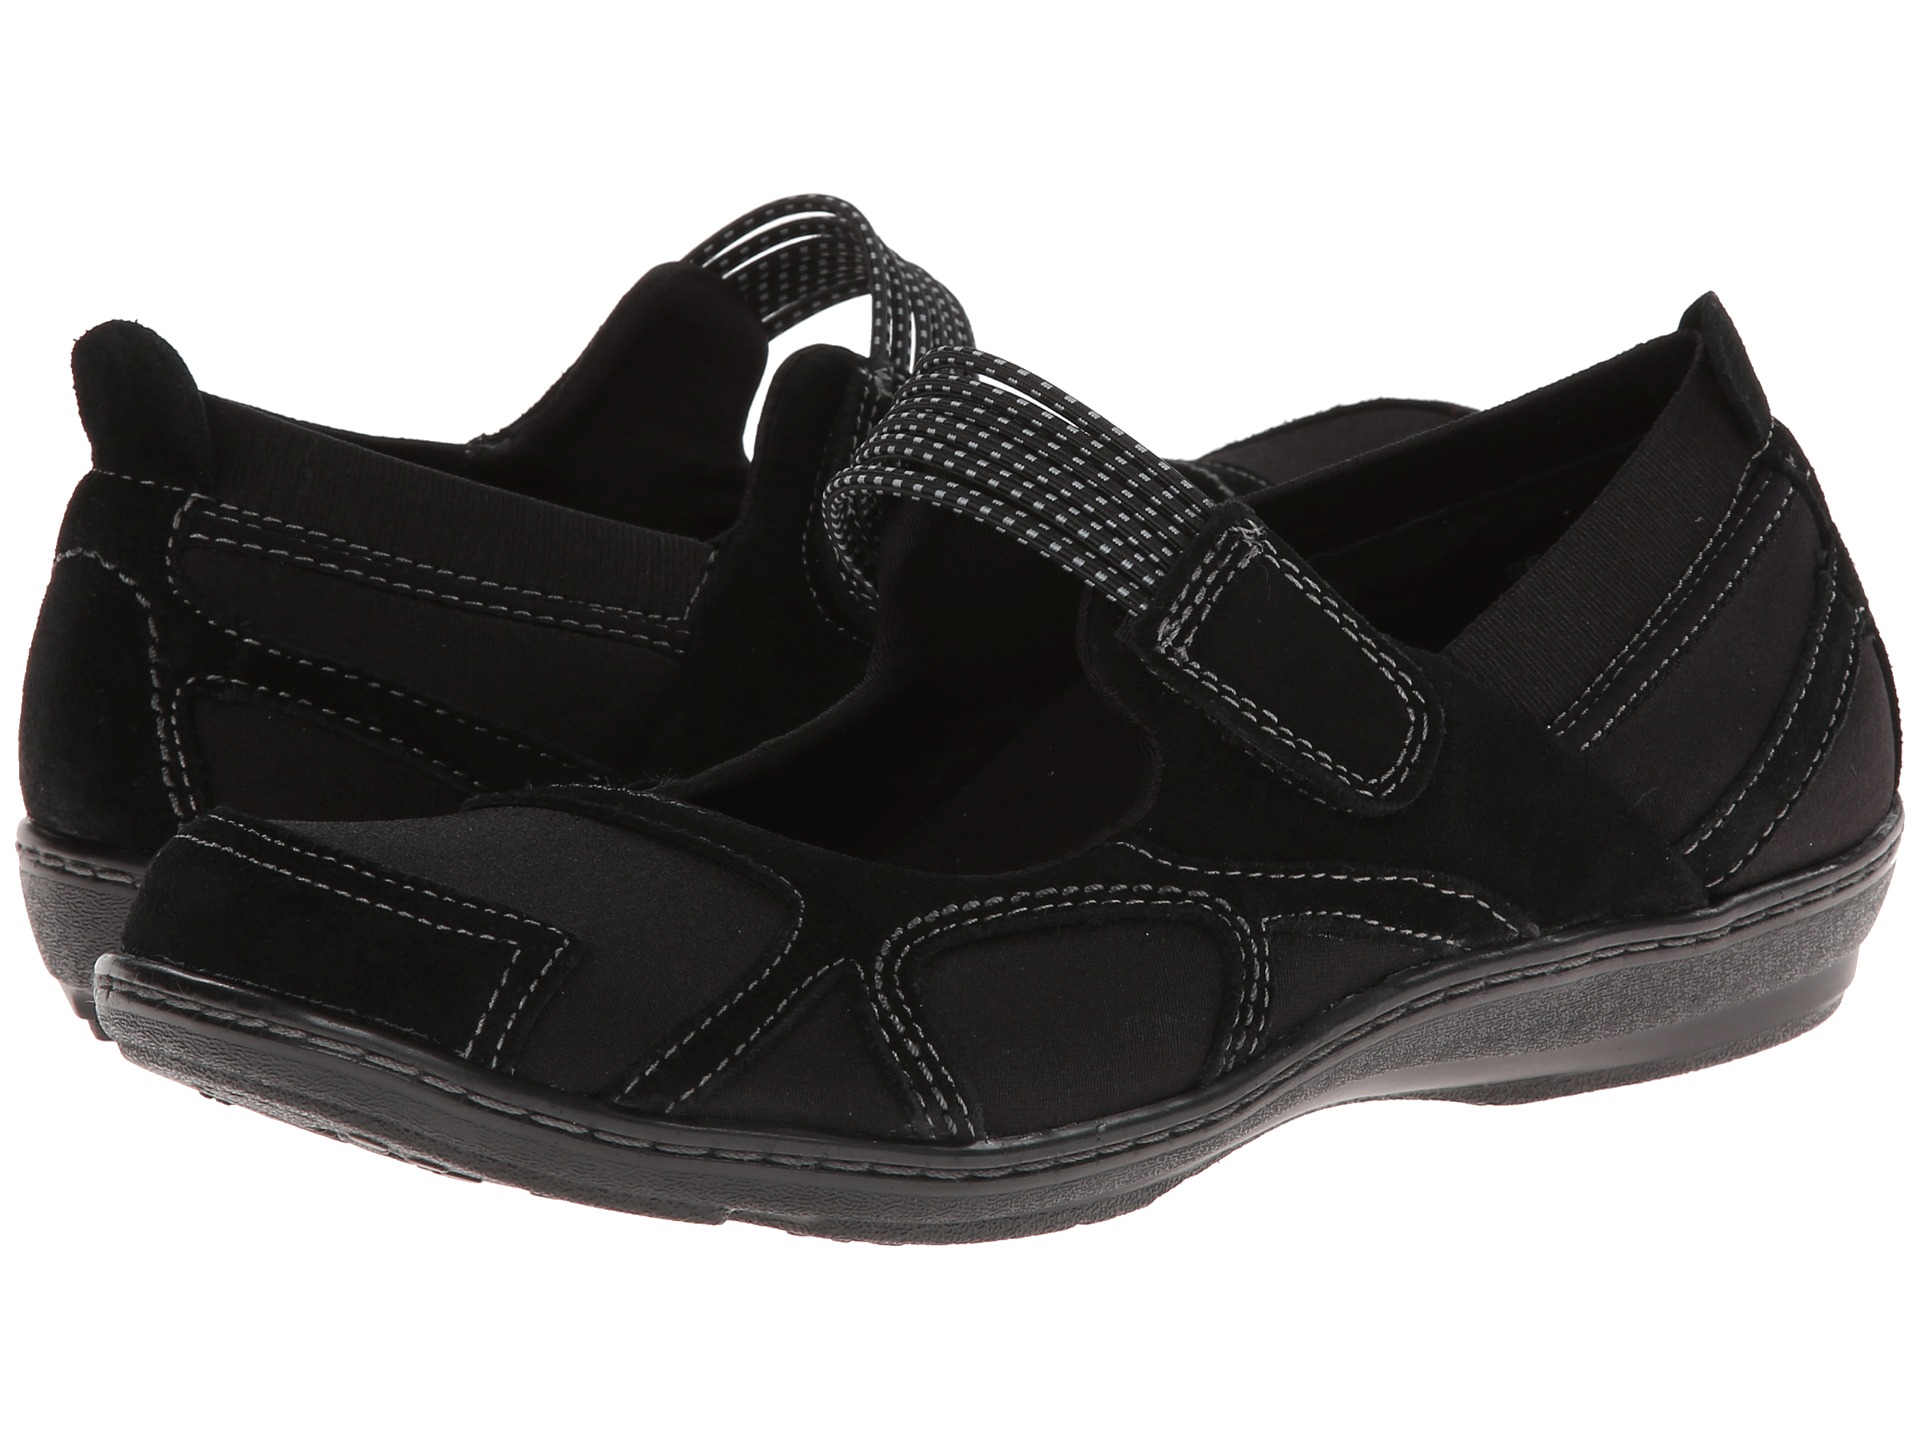 Aetrex Berries Bungee Mary Jane, Shoes | Shipped Free at Zappos